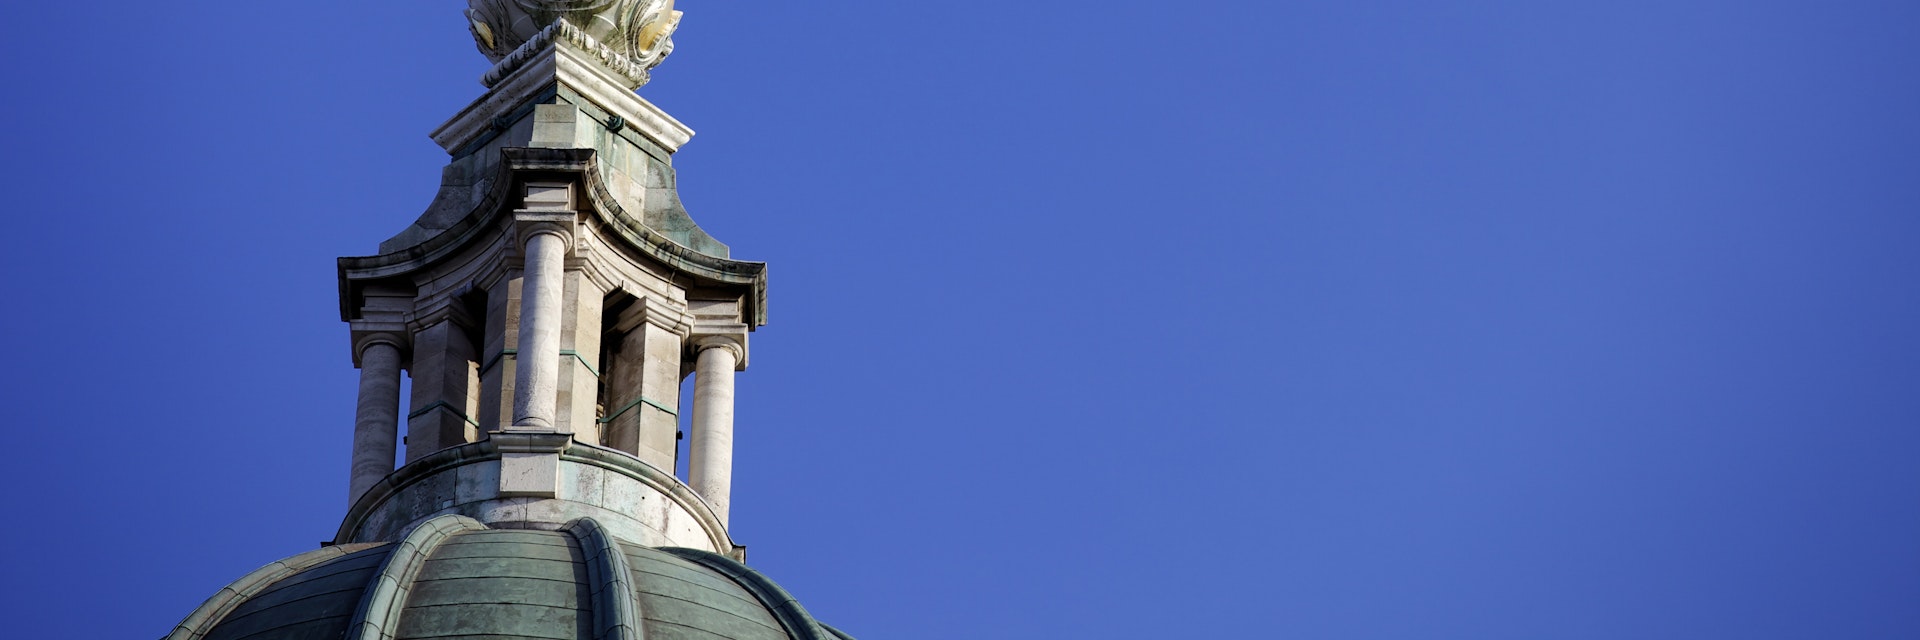 Scales of Justice above the Old Bailey Law Courts (Central Criminal Court) on former site of Newgate Prison, London, England, United Kingdom, Europe